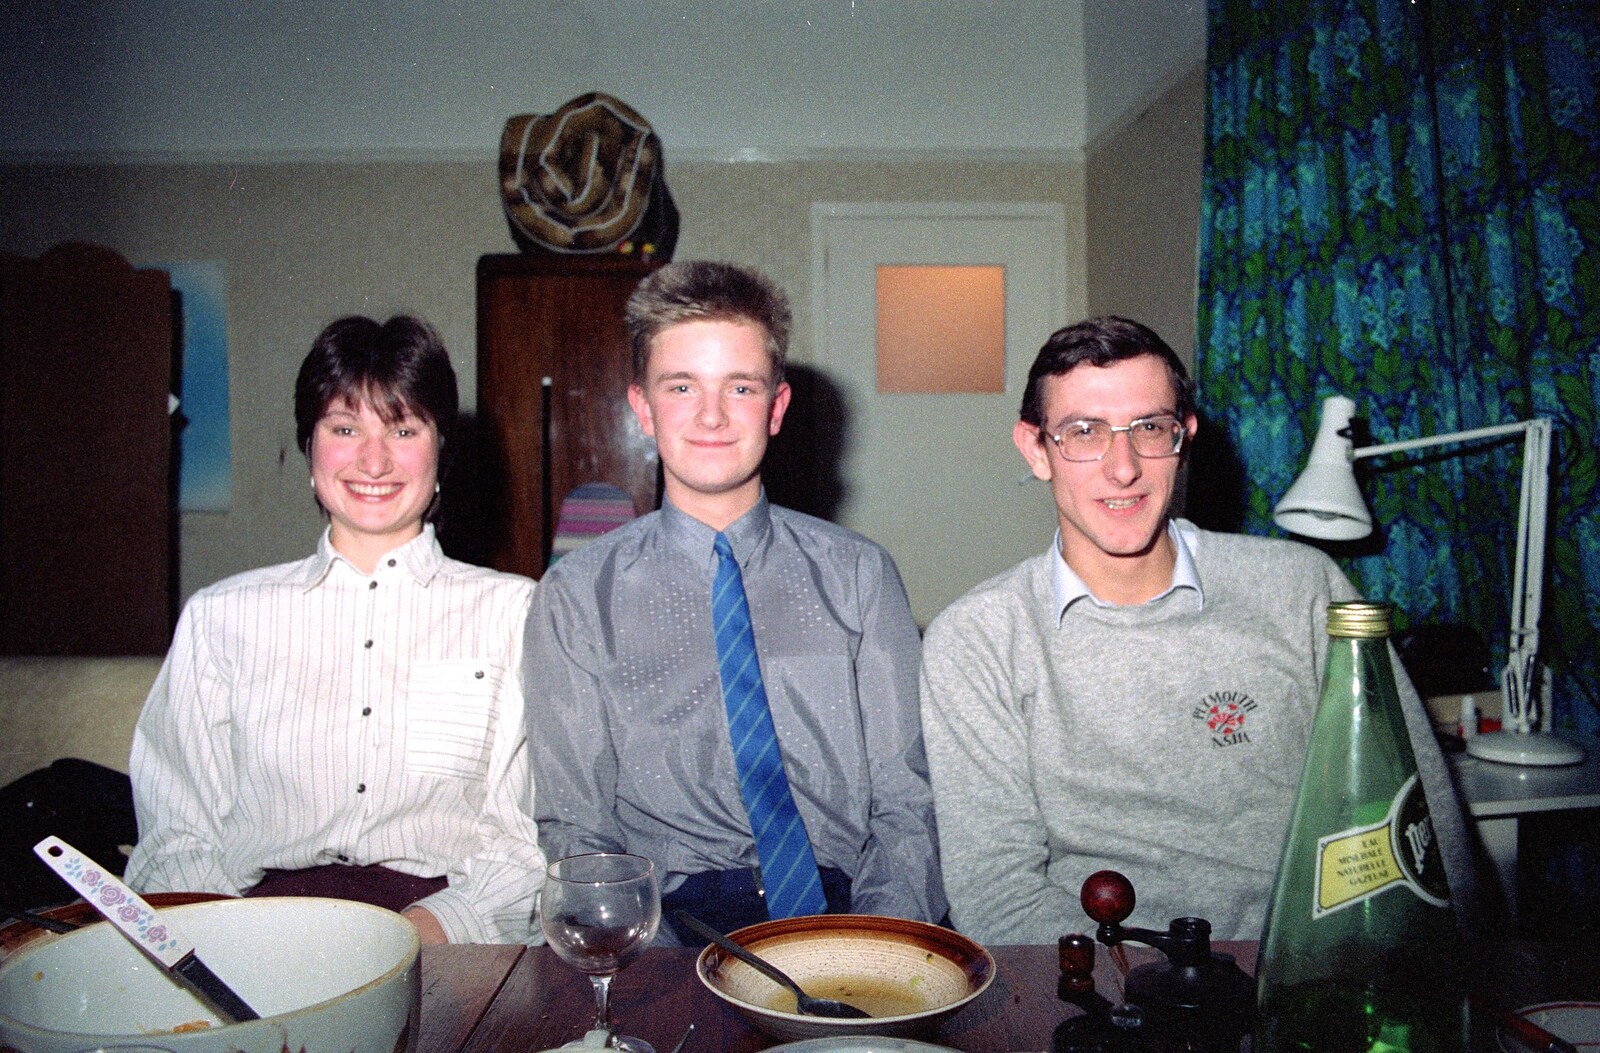 Angela, Nosher and Andy from Uni: A Dinner Party, Harbertonford and Buckfastleigh, Devon - 24th December 1988